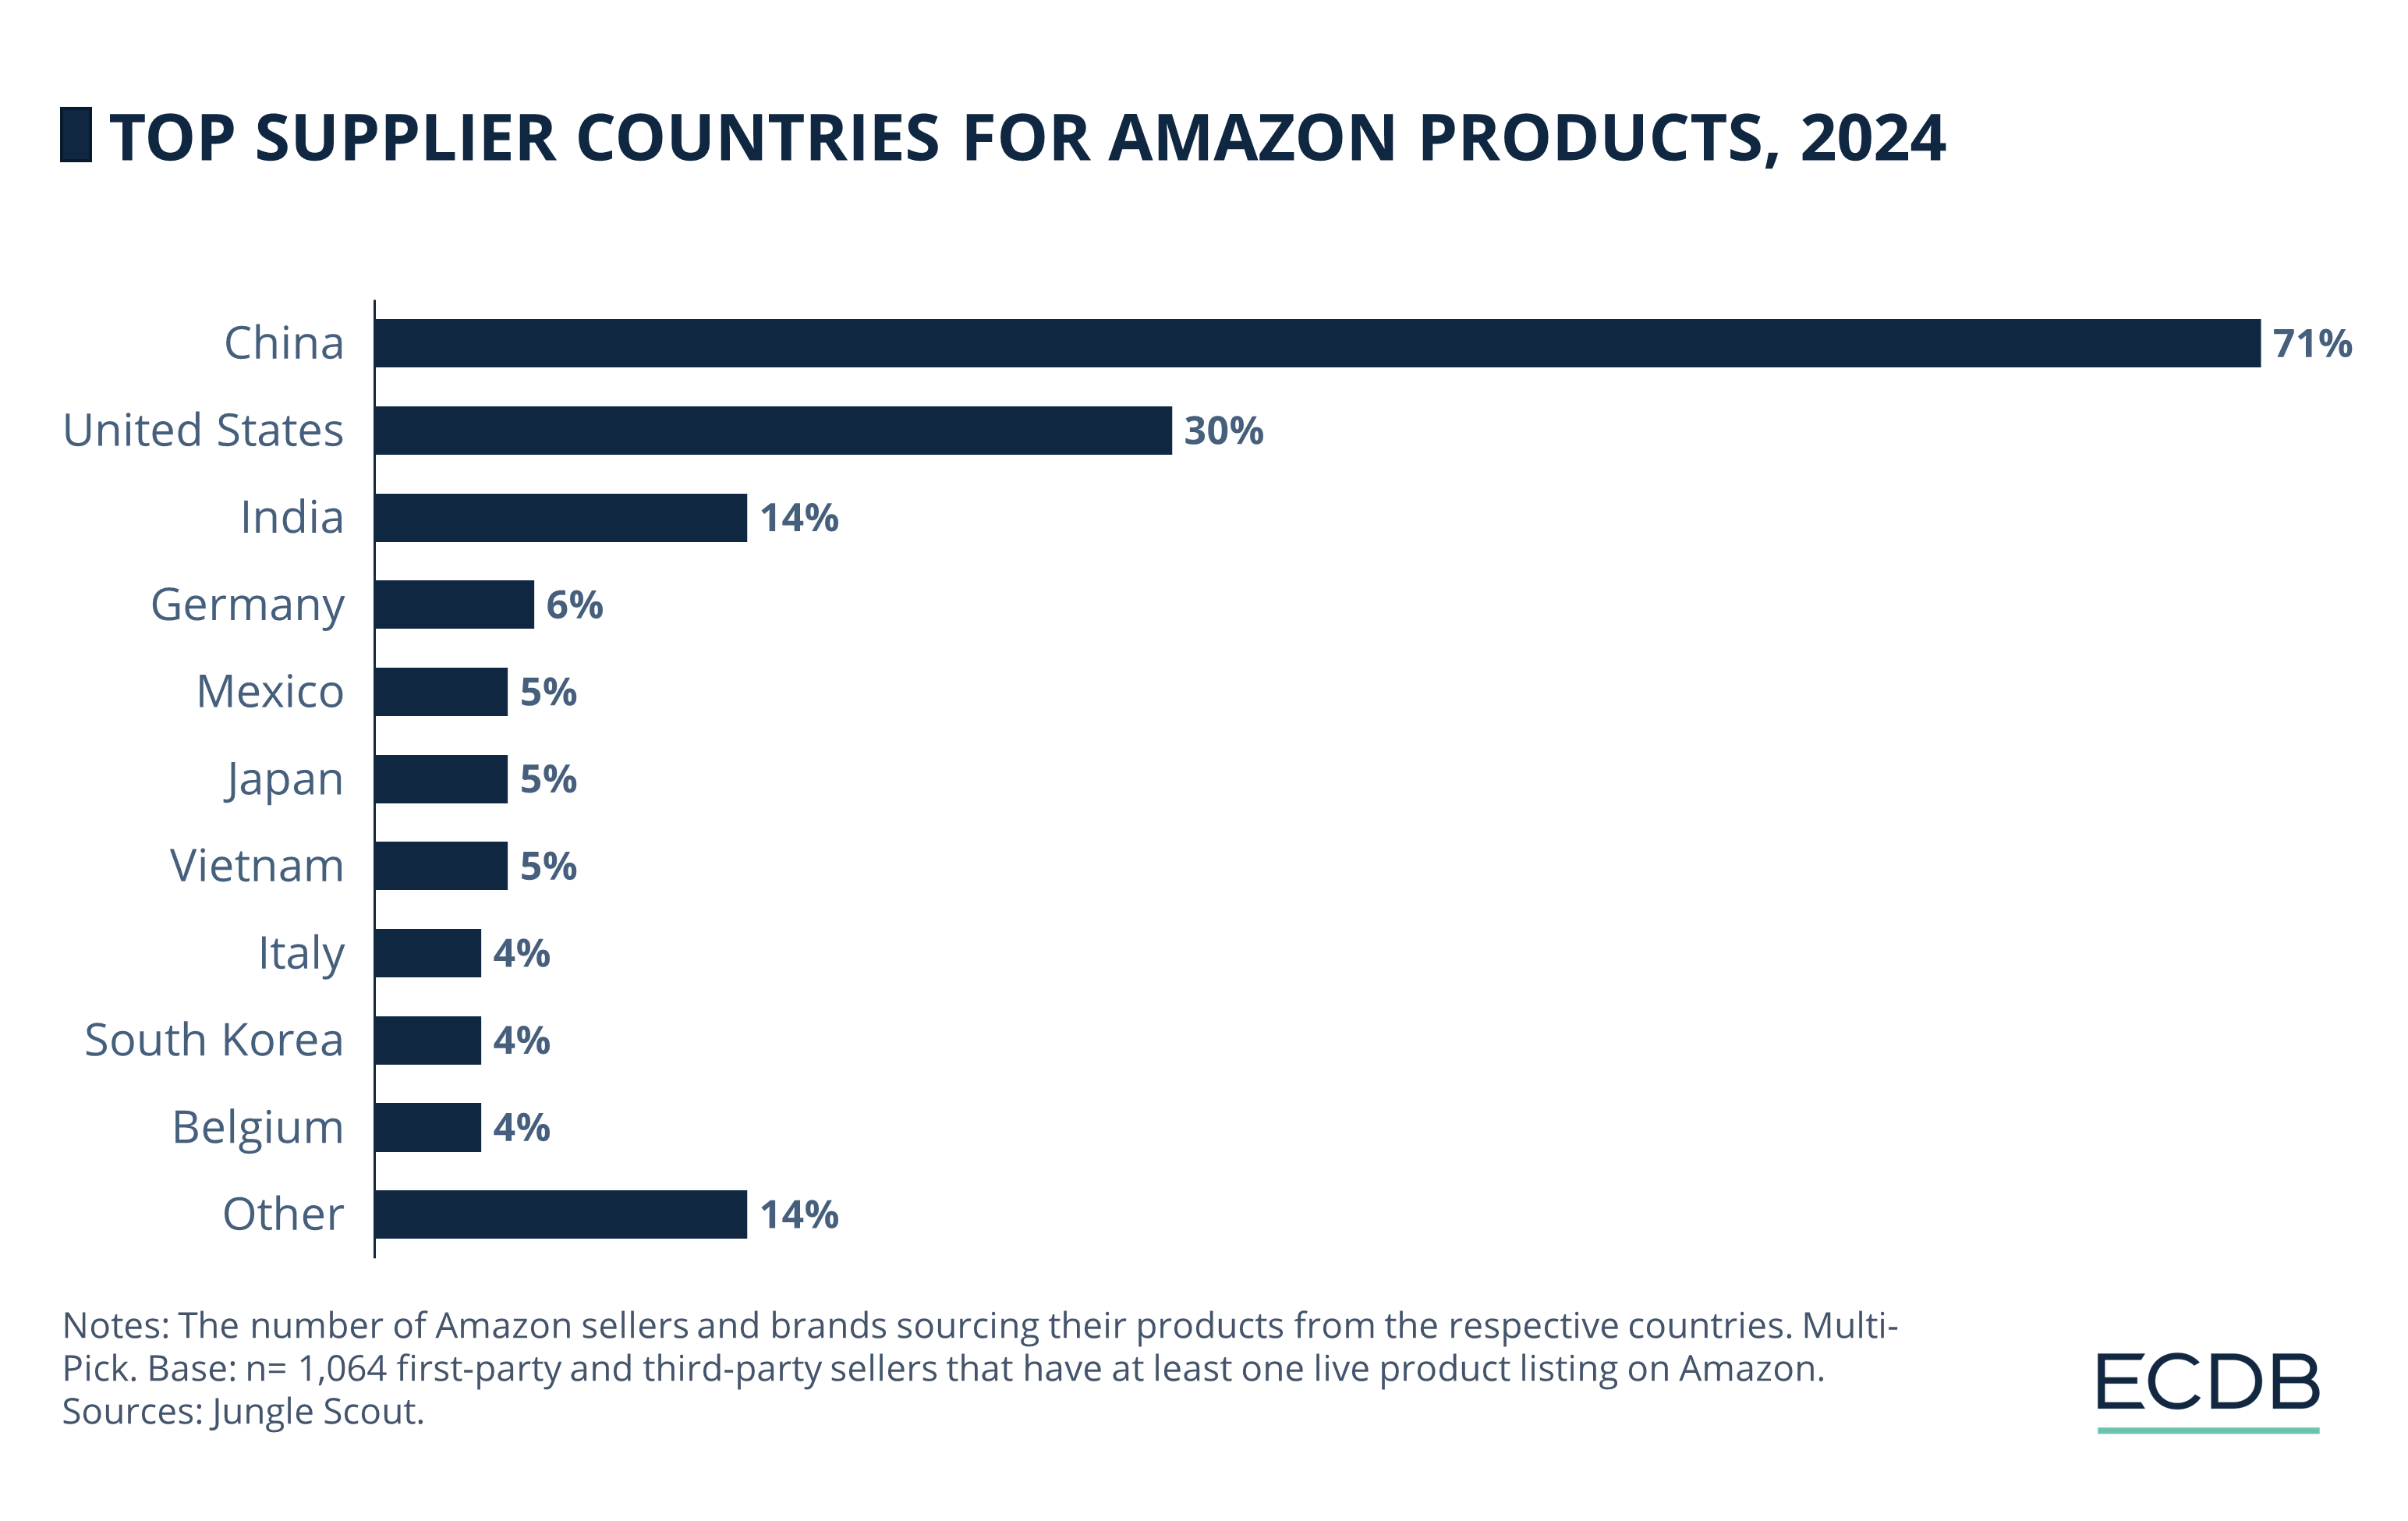 Top Supplier Countries for Amazon's Products, 2024